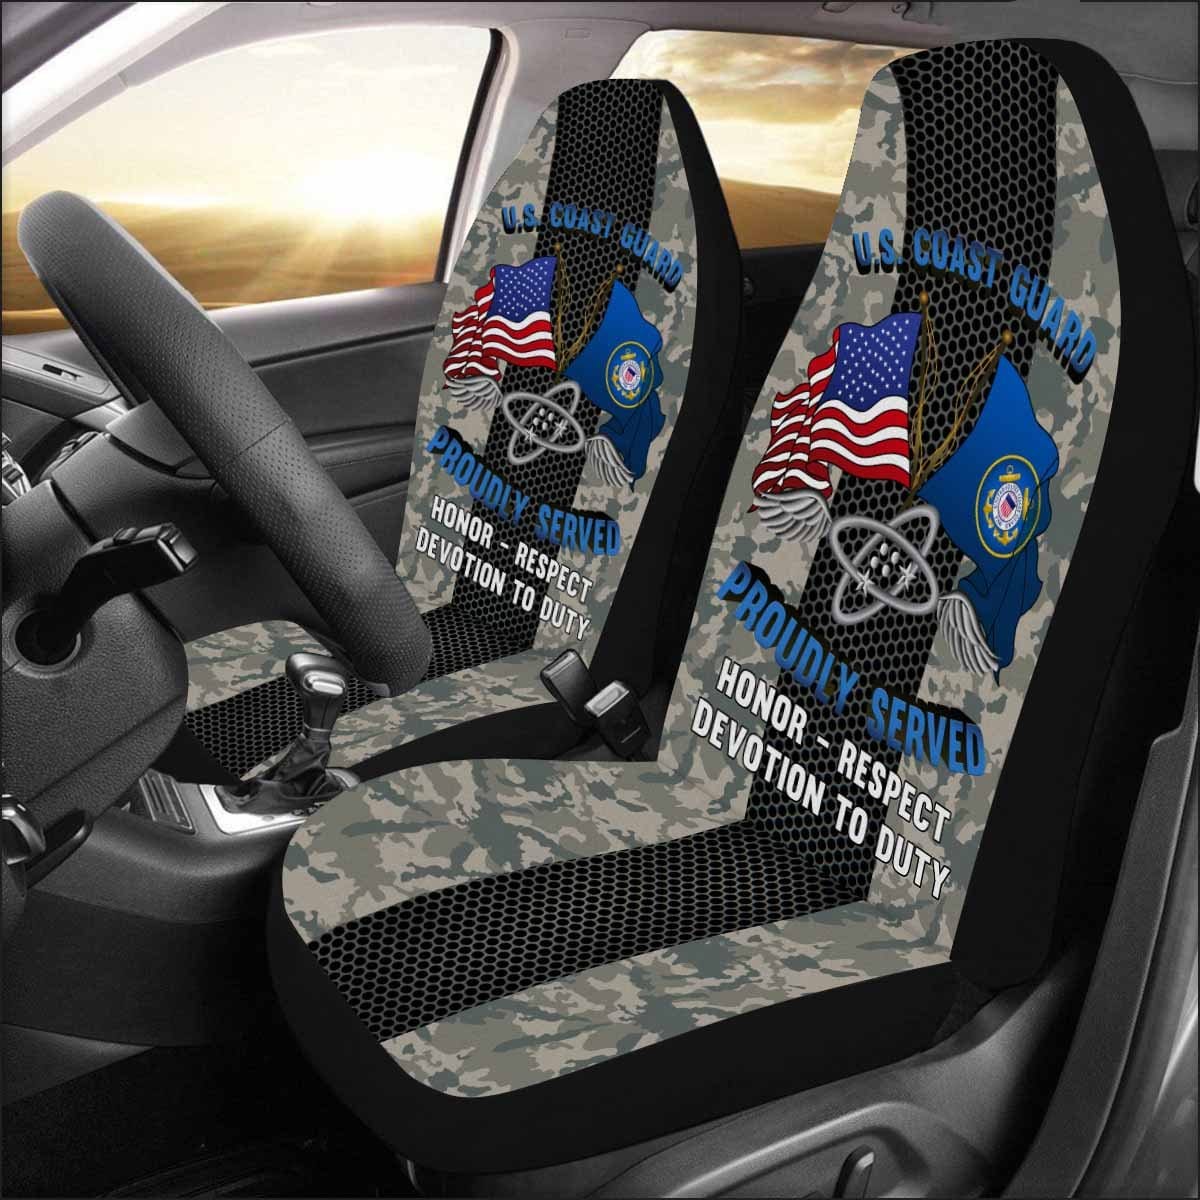 USCG AVIONICS ELECTRICAL TECHNICIAN AET Logo Proudly Served - Car Seat Covers (Set of 2)-SeatCovers-USCG-Rate-Veterans Nation